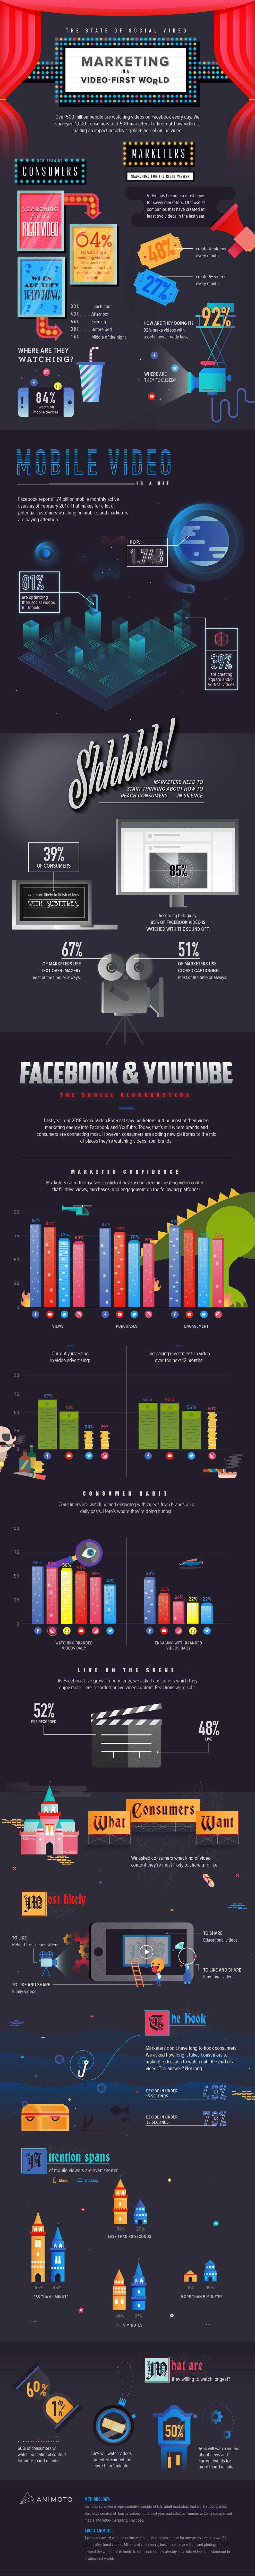 The Undeniable Power Of Video Content On Social Media [Infographic]